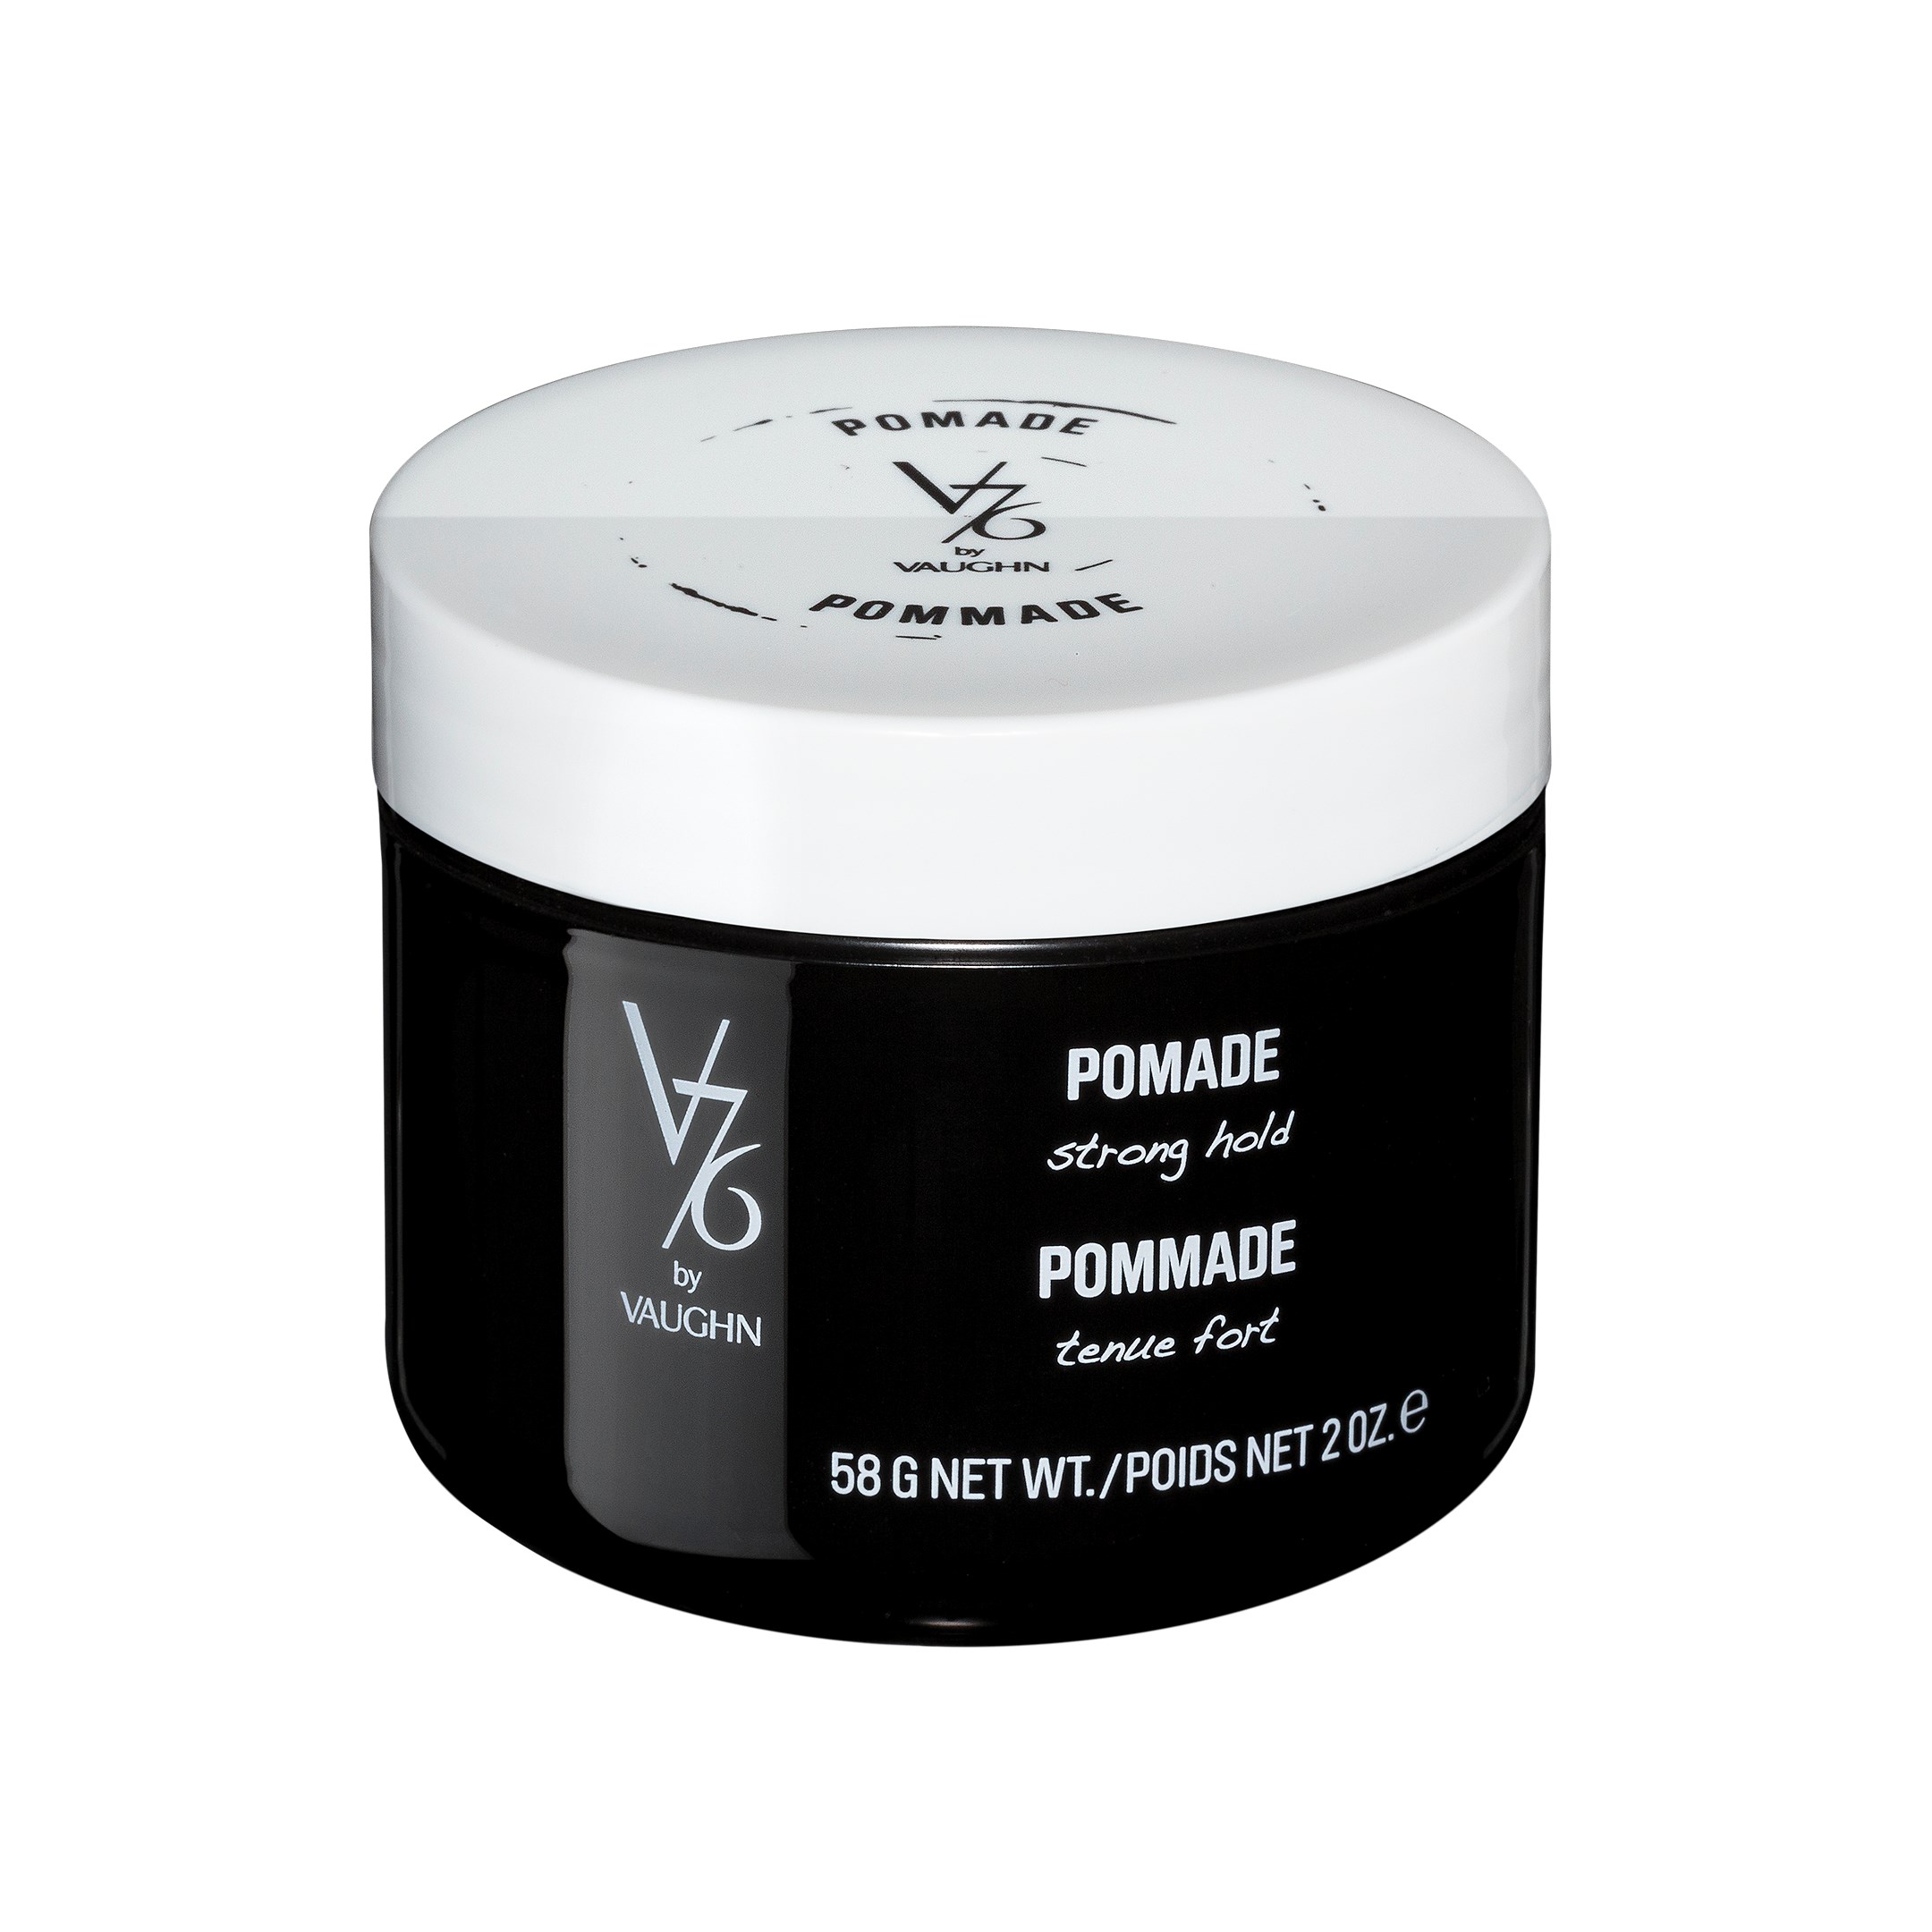 V76 by Vaughn Waxes Pomade 58 g